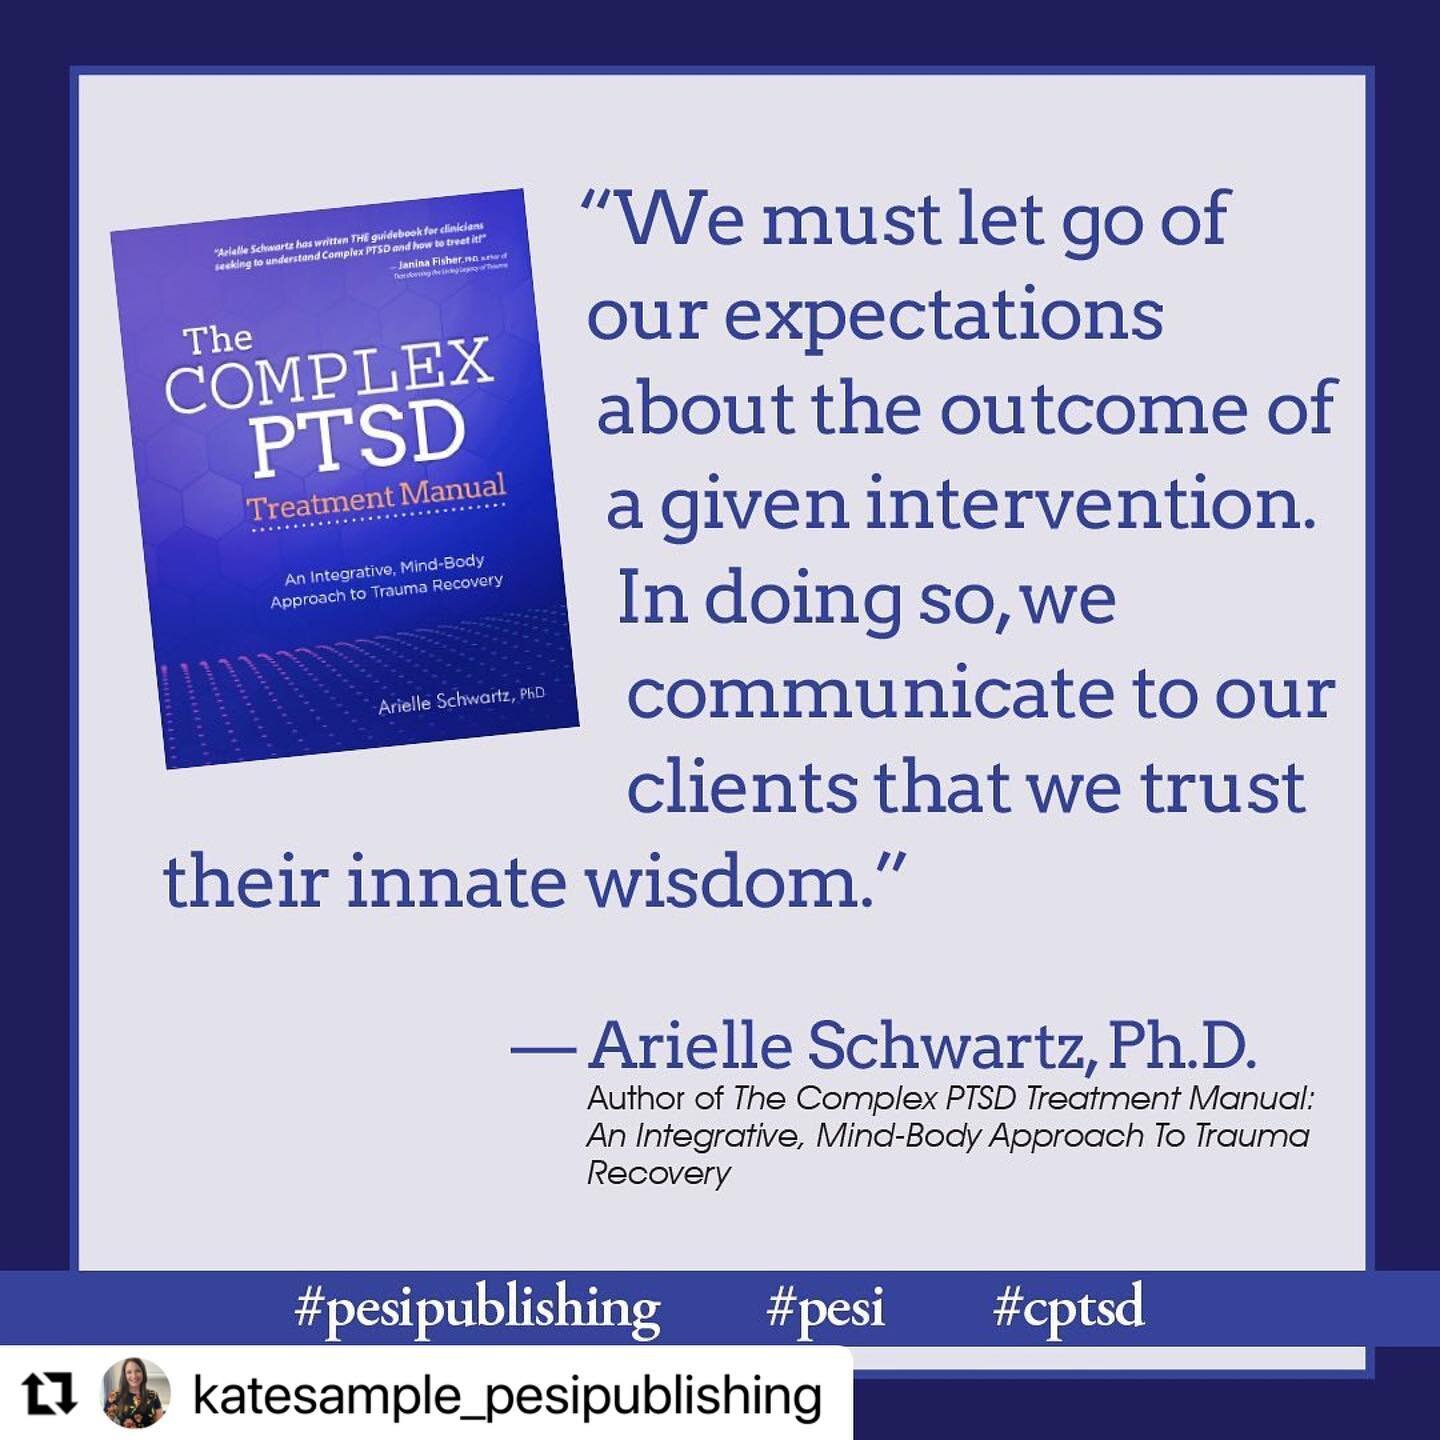 This looks fantastic!!! 🤩 

#Repost @katesample_pesipublishing with @make_repost
・・・
Award-winning author @arielleschwartzboulder has a new masterpiece coming out soon!  Pre-order your copy today! ⭐️

#complextrauma #cptsd #trauma #pesi #pesipublish